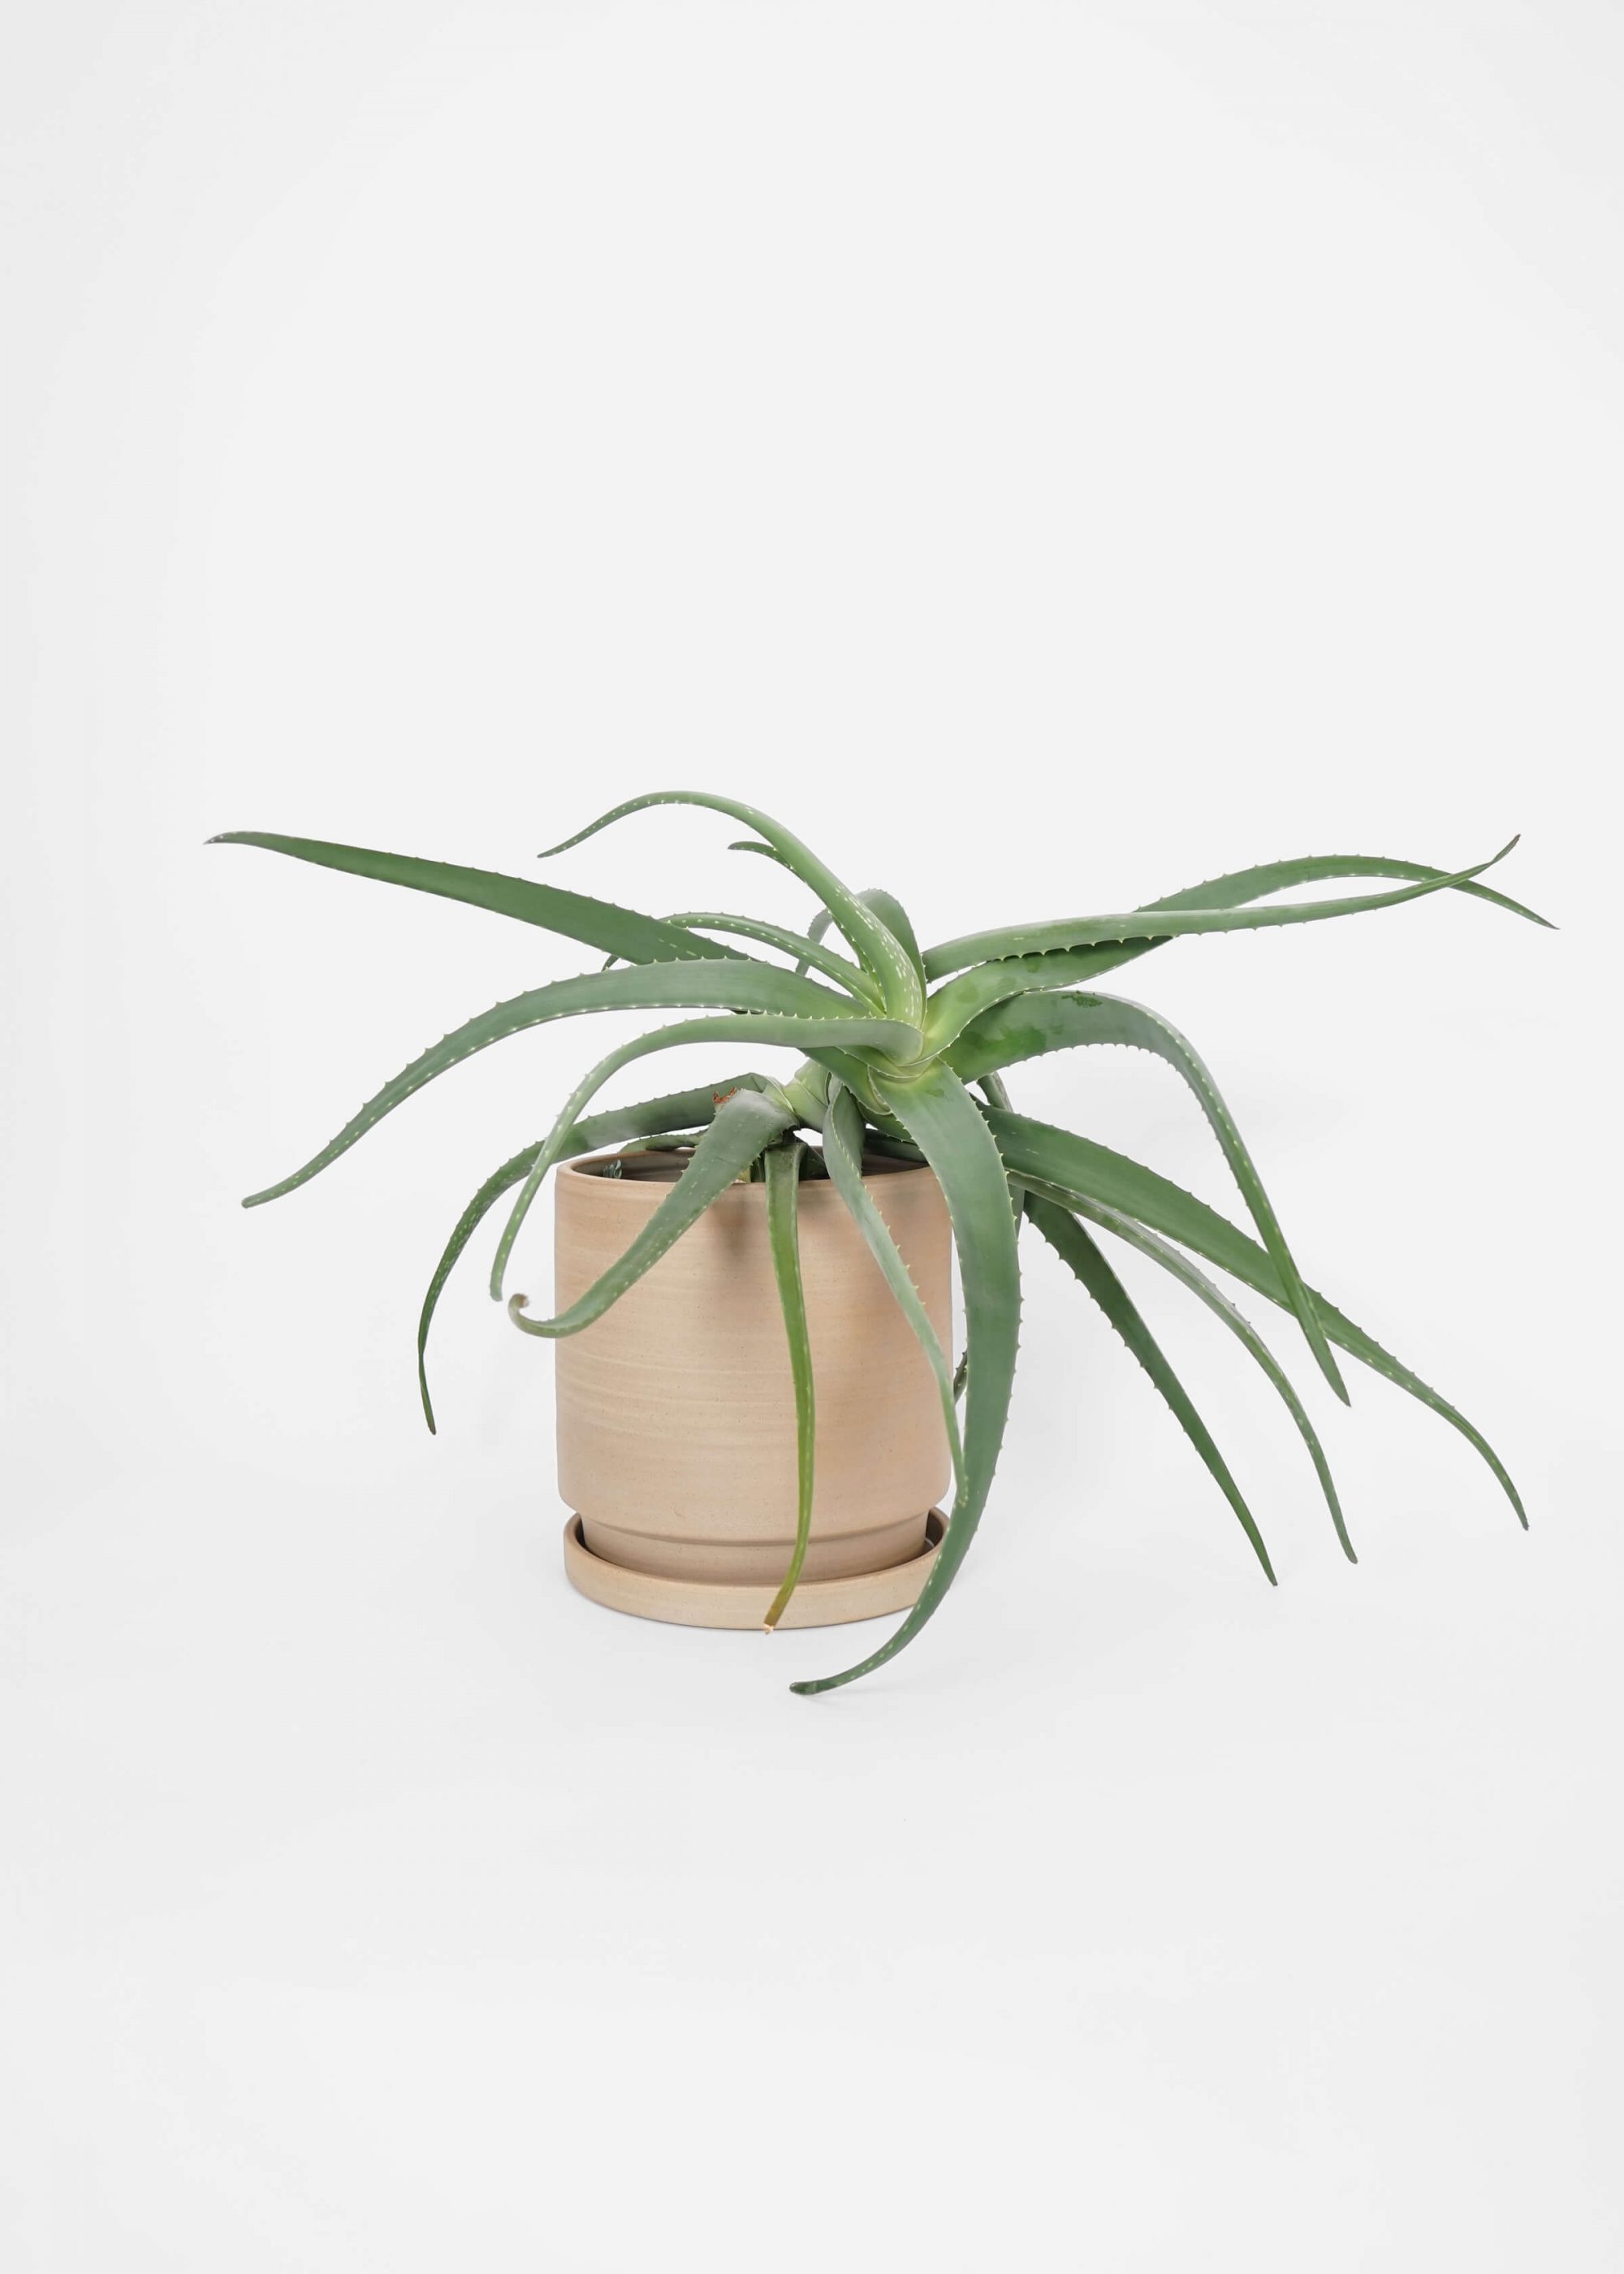 Product image for N° ICSD1 BRUTAL Planter Raw Large